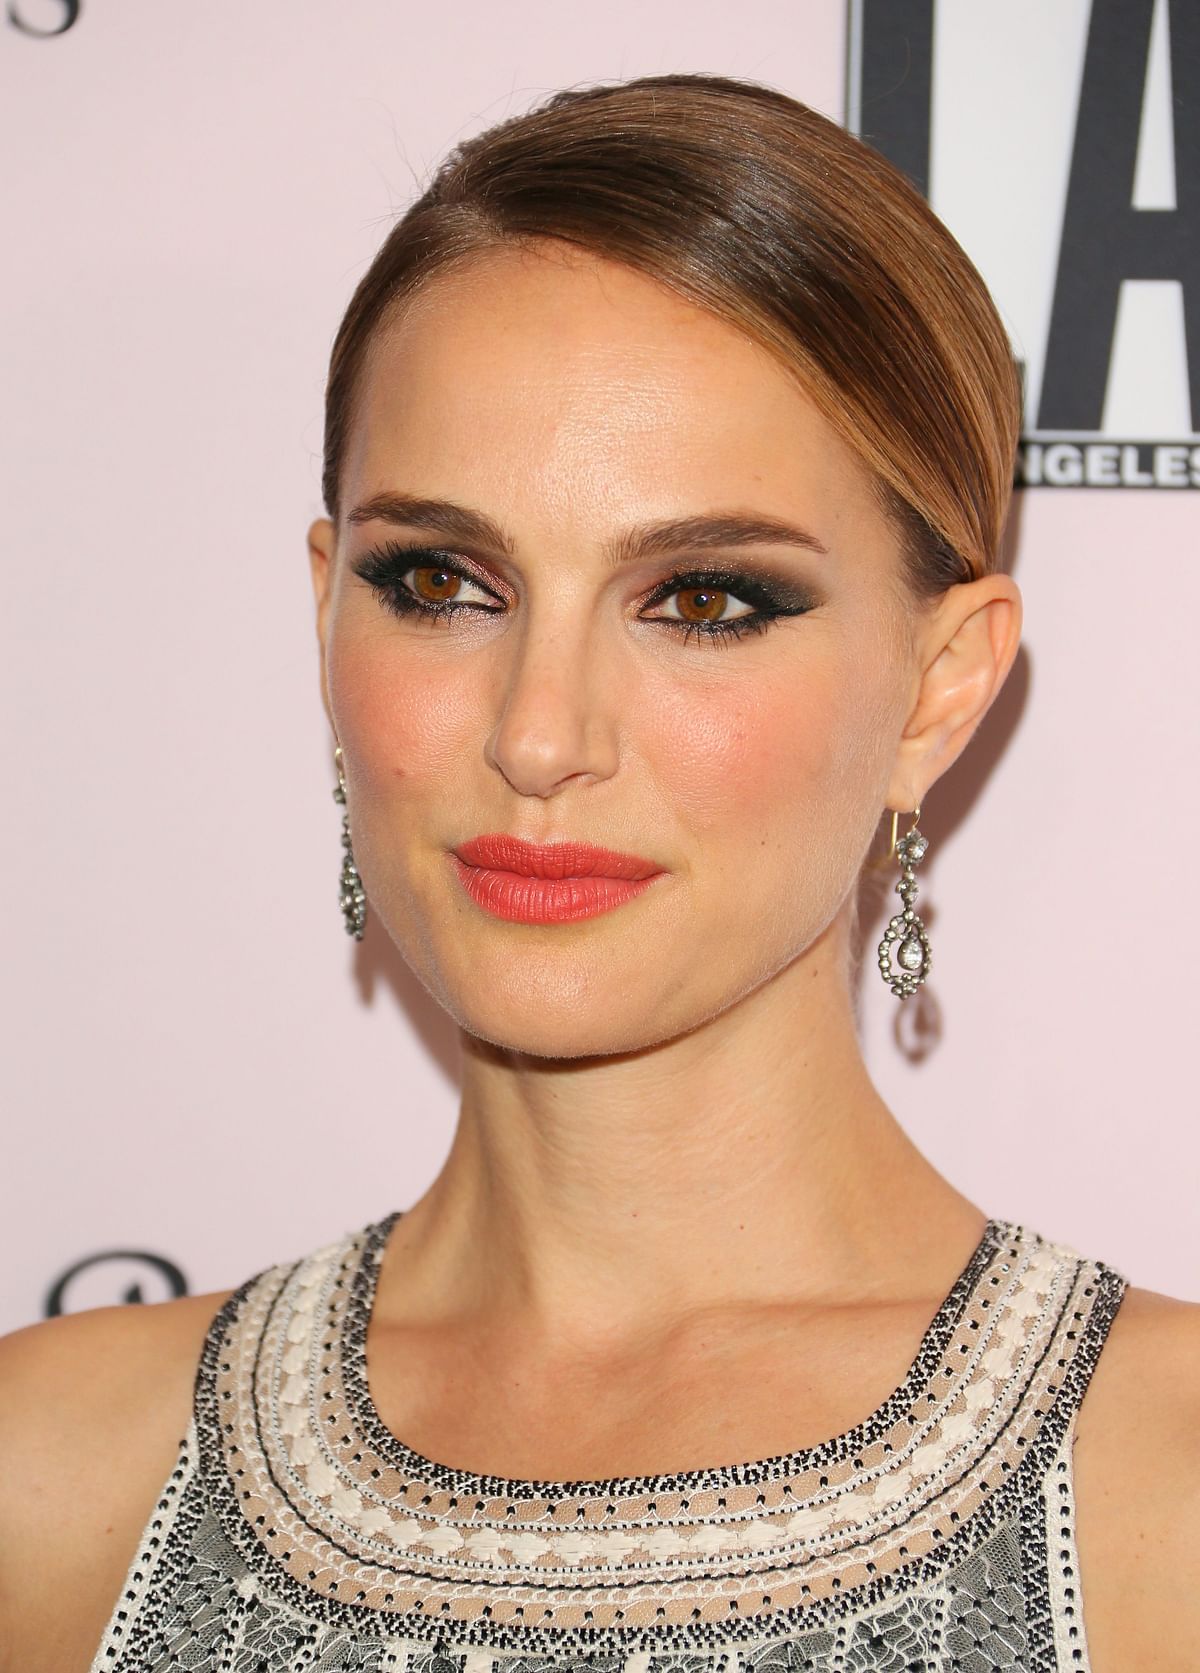 US/Israeli actress Natalie Portman arrives for the LA Dance Project annual gala at Hauser and Wirth art gallery in Los Angeles on 19 October, 2019. Photo: AFP